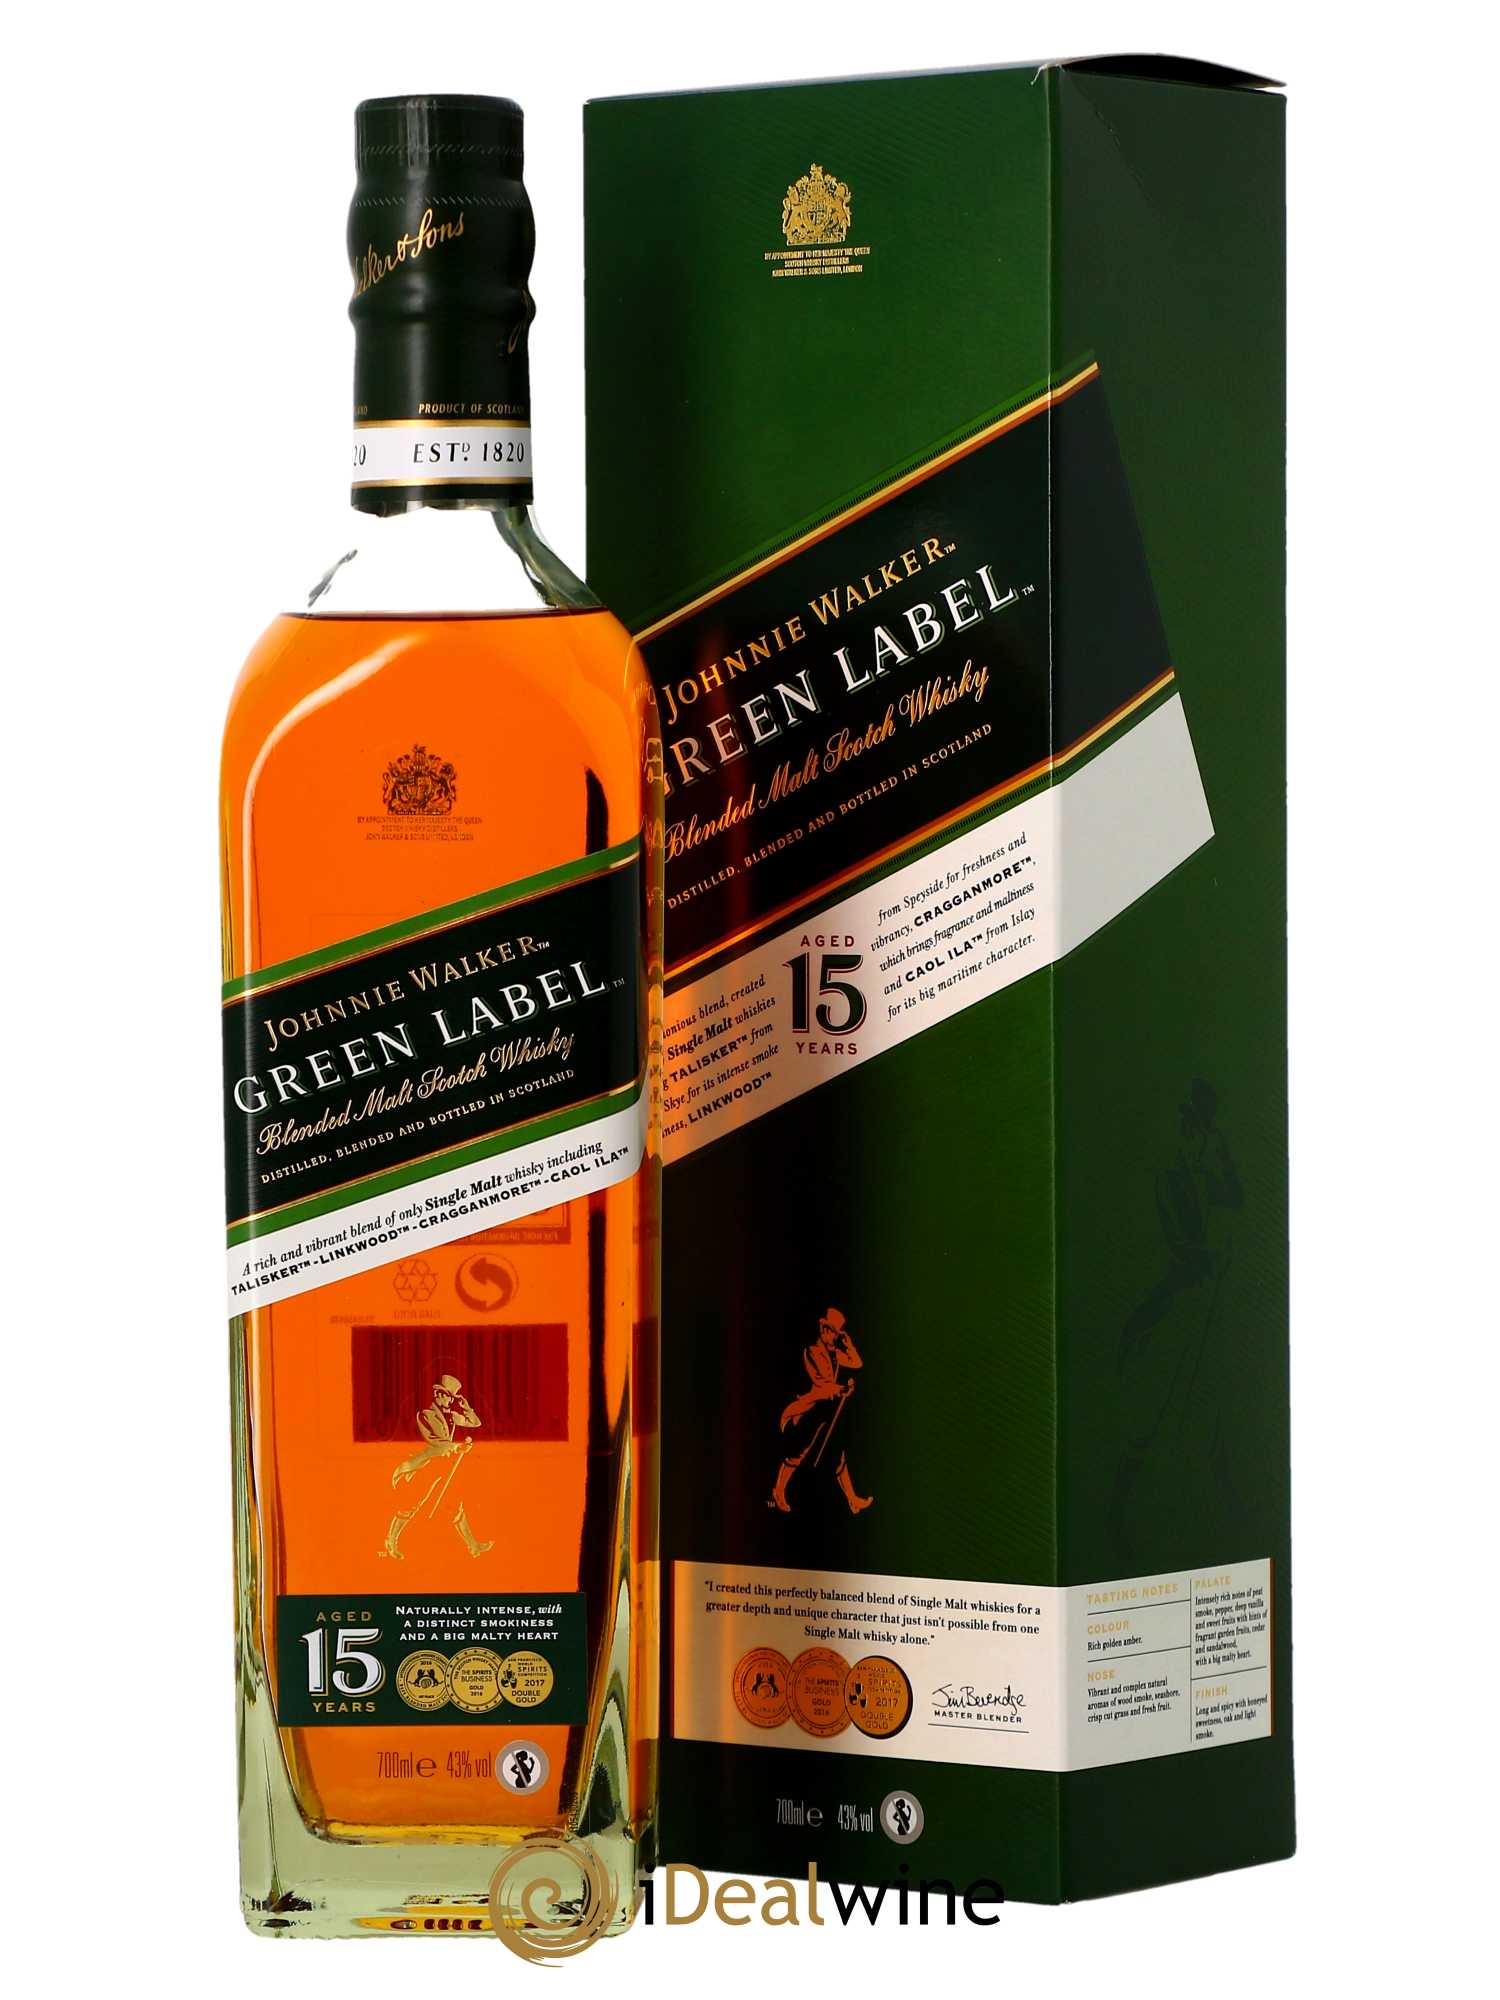 Acquistare Whisky Johnnie Walker Green Label 15 ans (lotto: 6218)